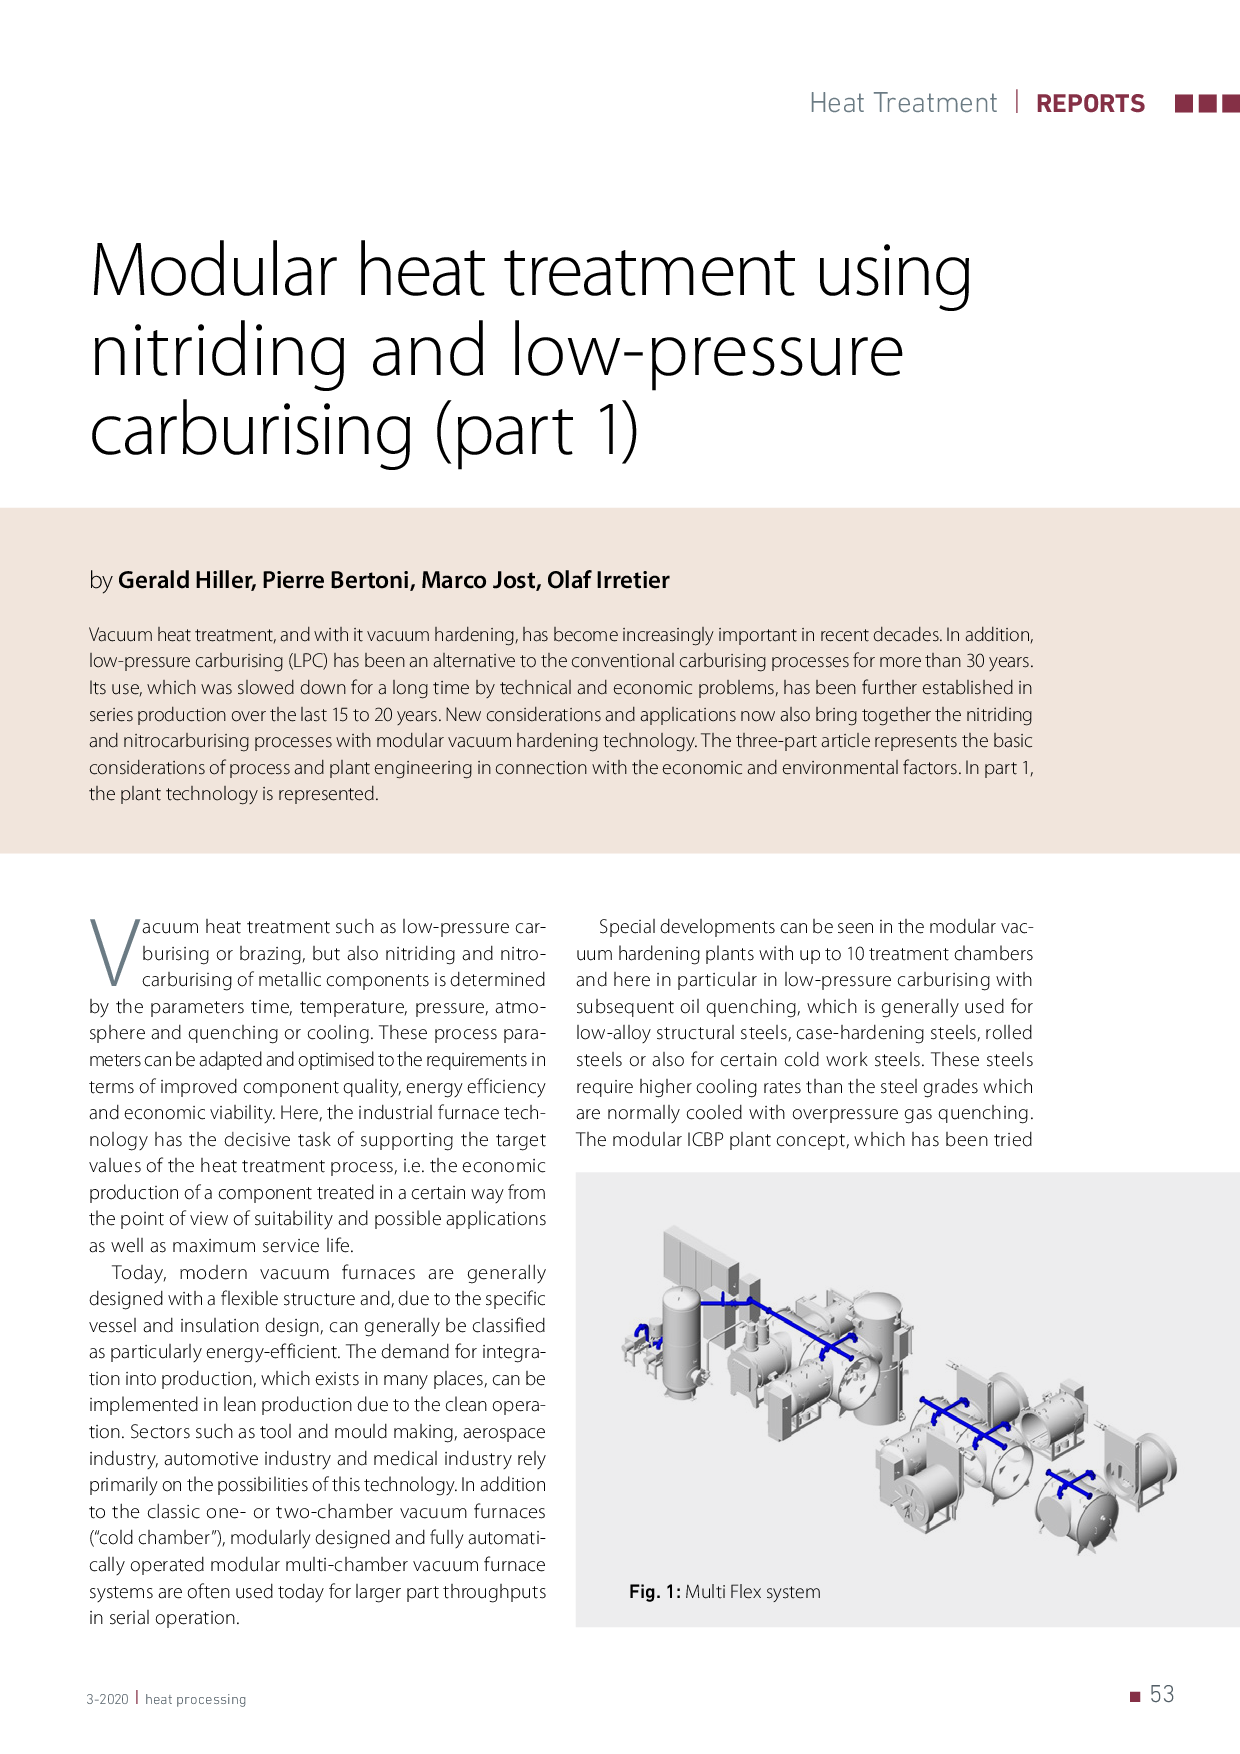 Modular heat treatment using nitriding and low-pressure carburising (part 1)